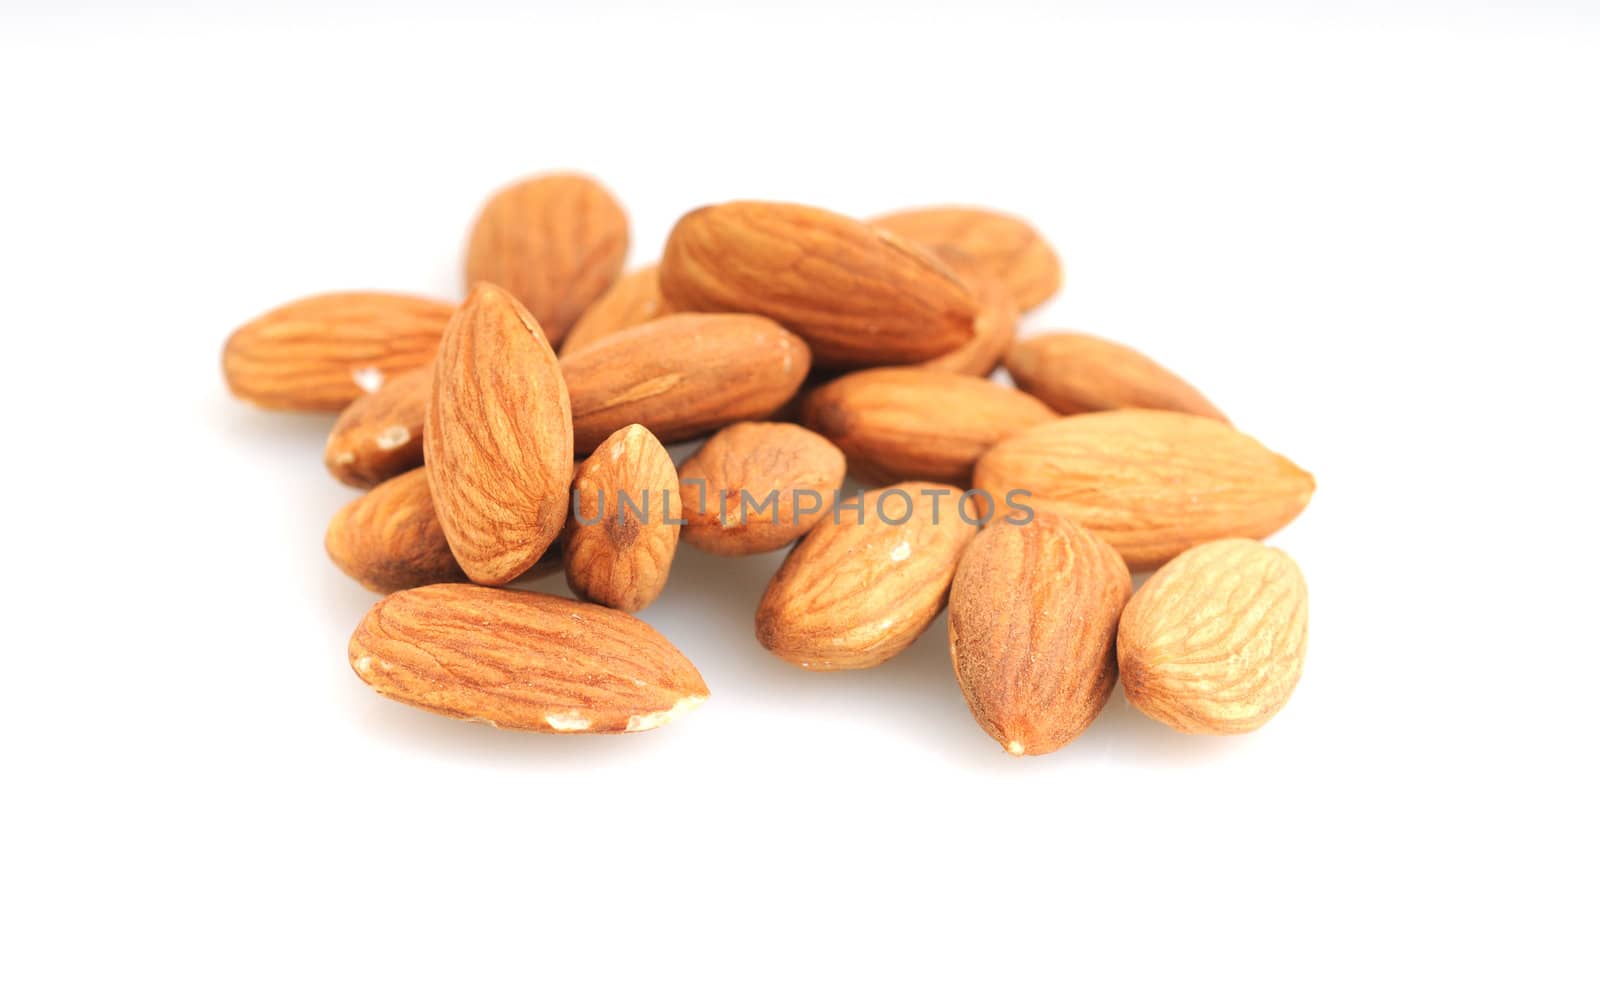 Raw almonds on a white background